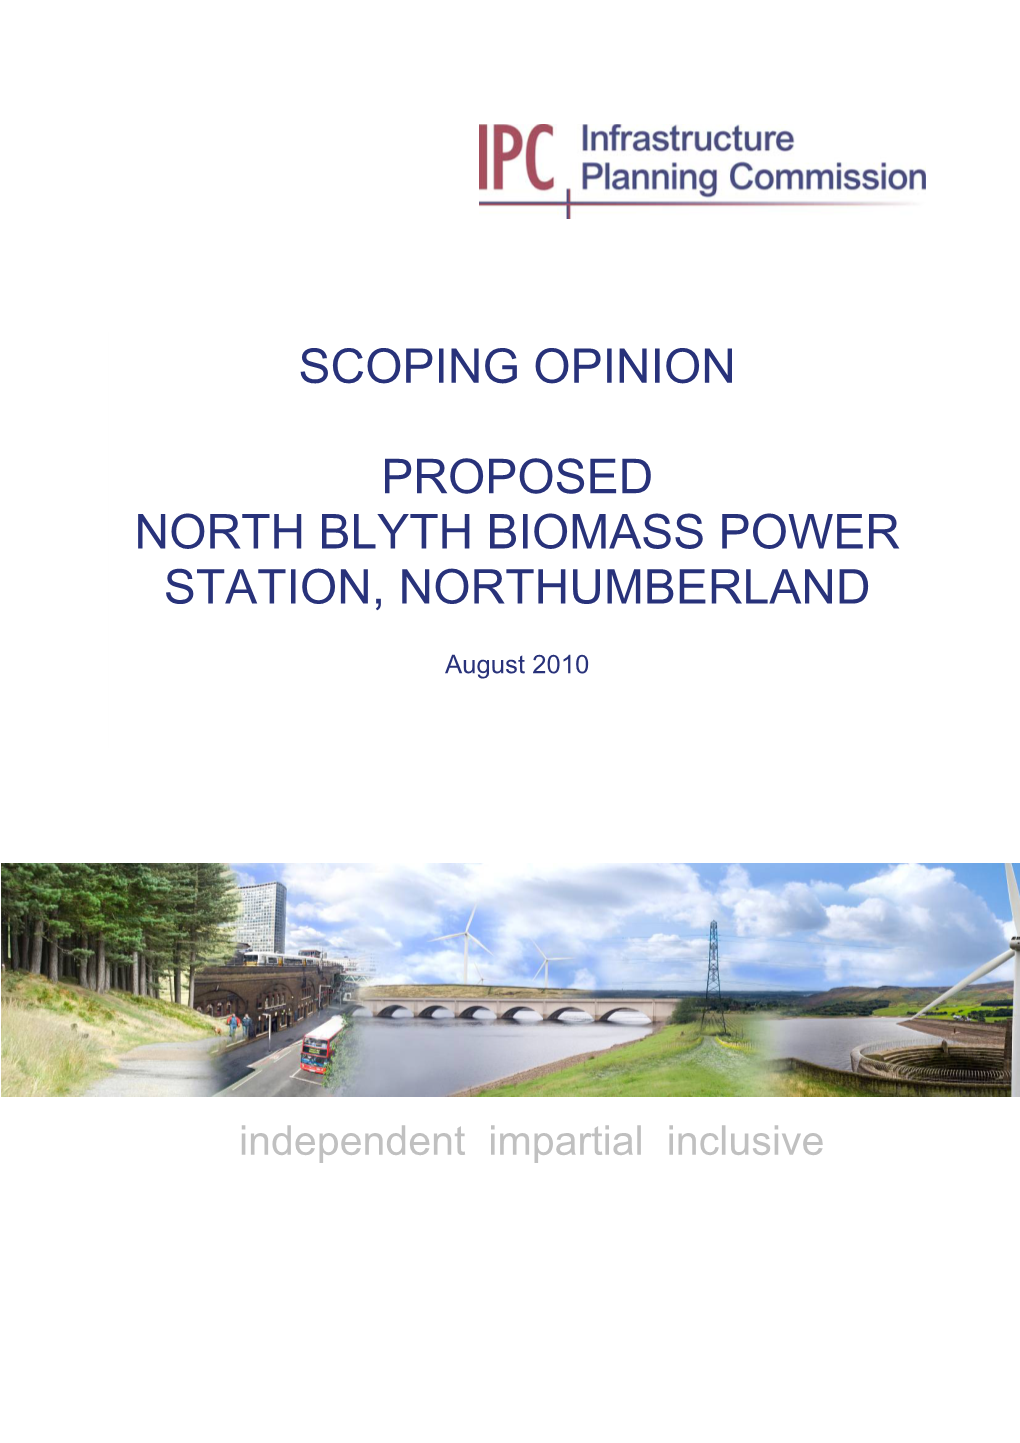 Scoping Opinion Proposed North Blyth Biomass Power